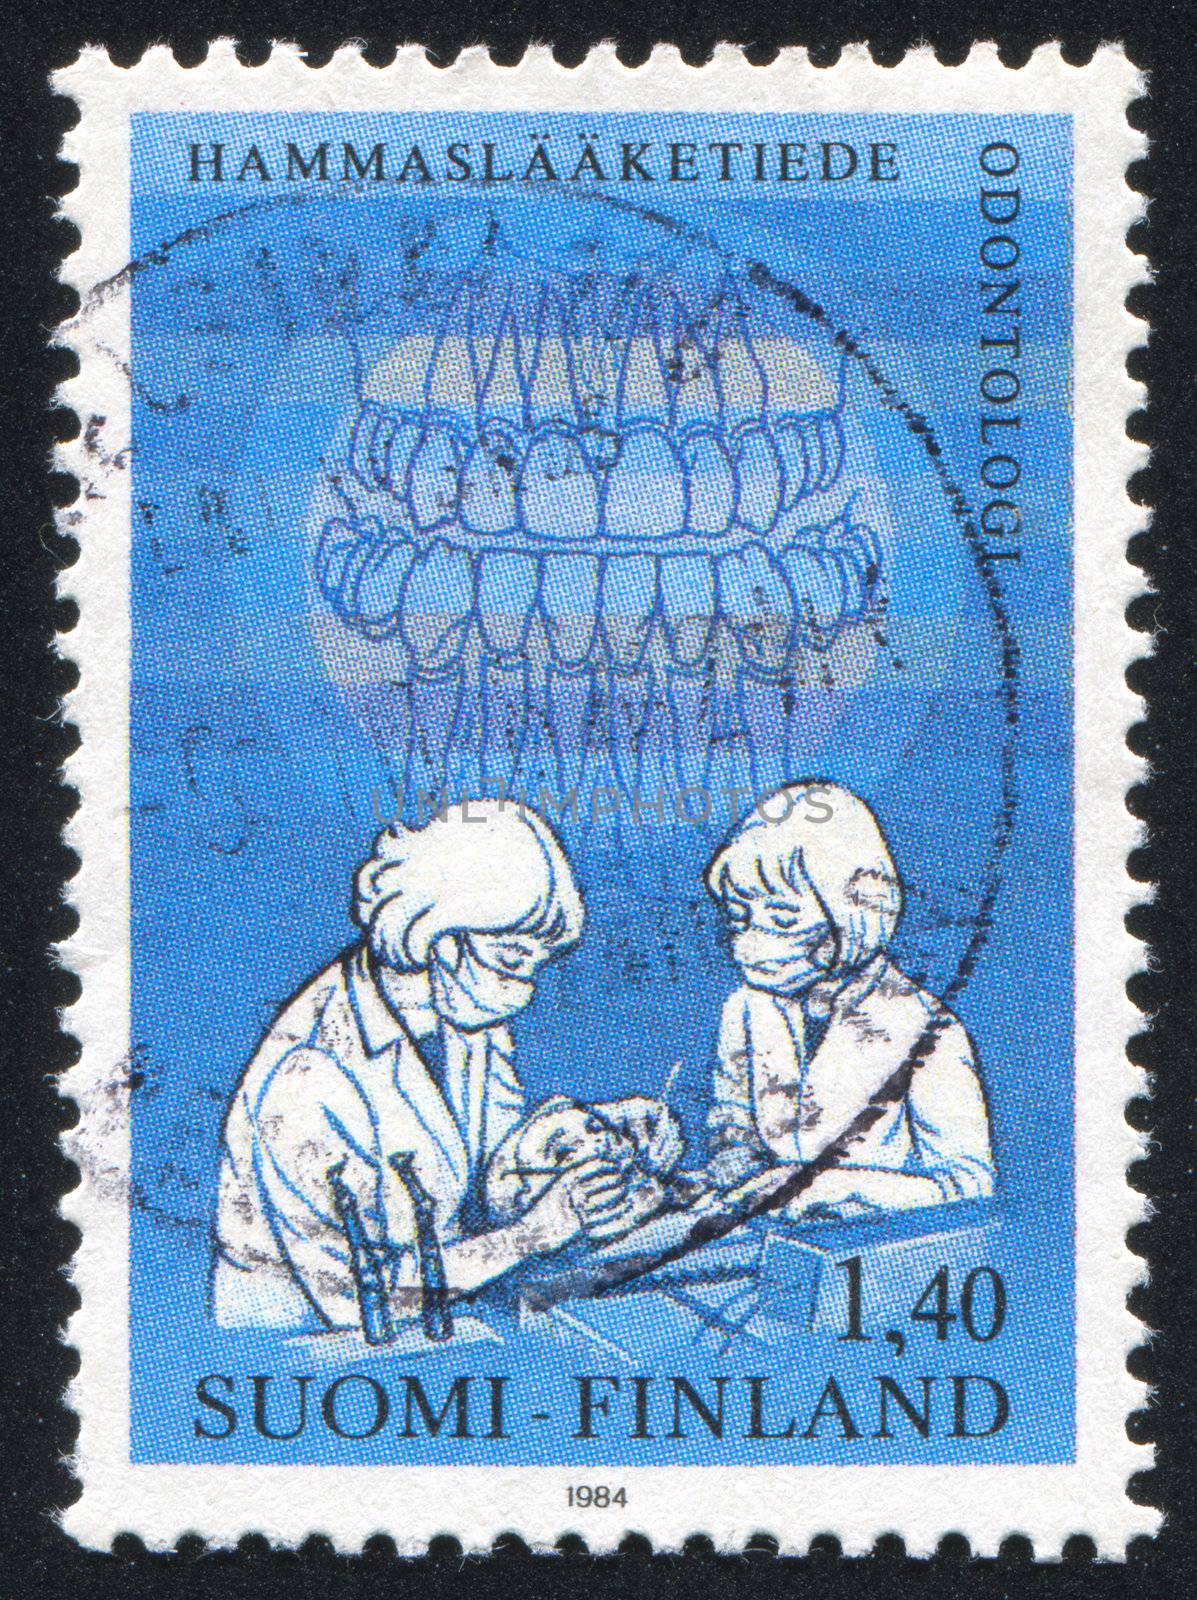 FINLAND - CIRCA 1984: stamp printed by Finland, shows Dentists Examining Patient, circa 1984